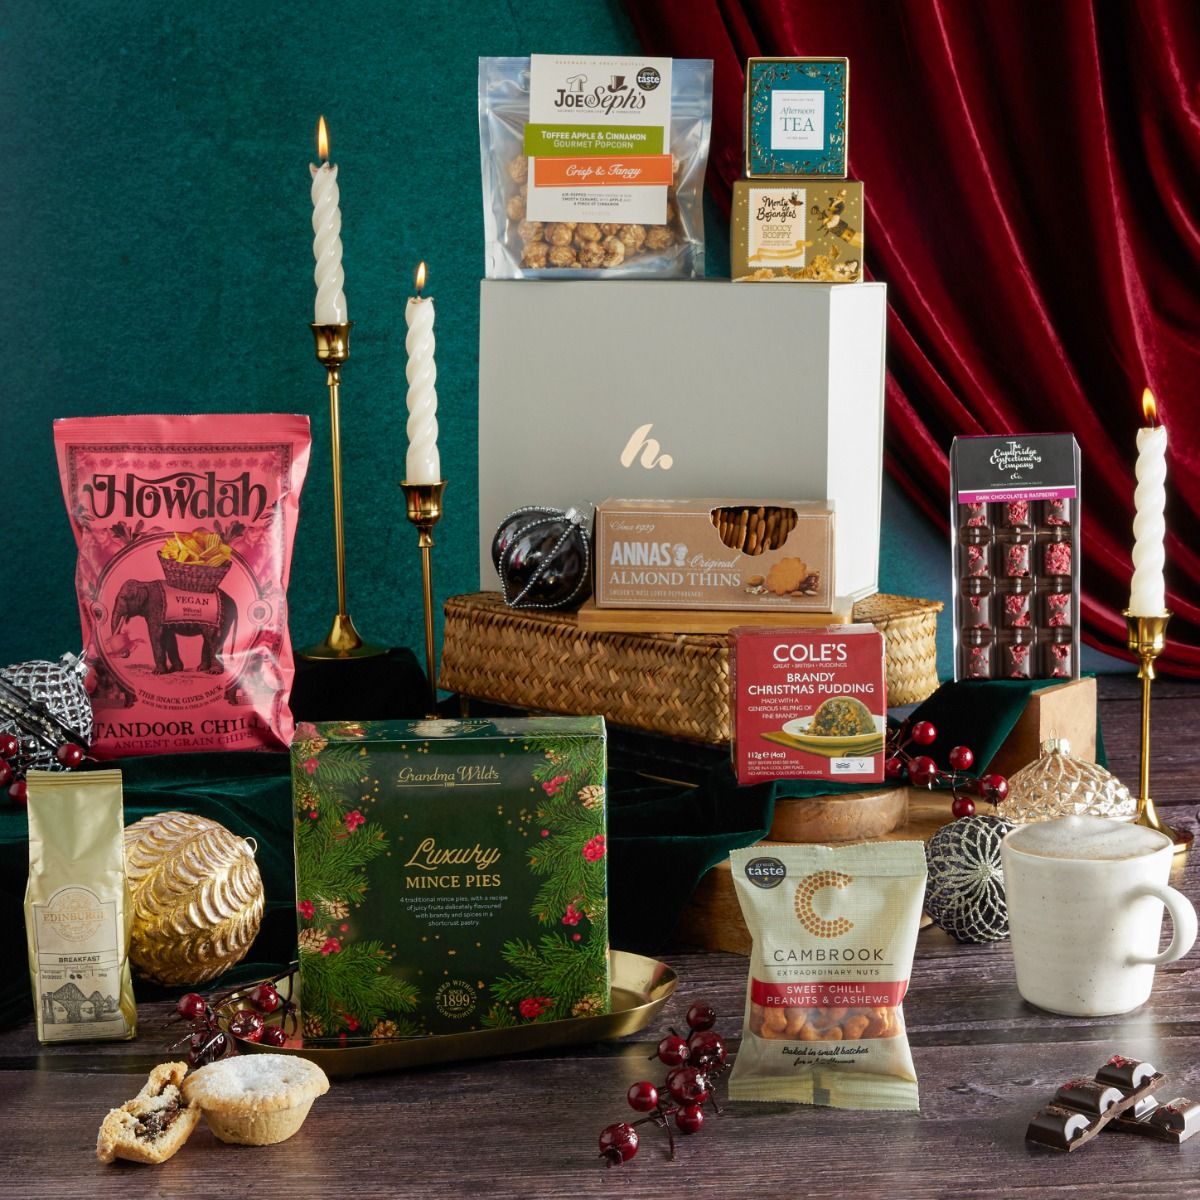 The Festive Feast Gift Box with contents on display